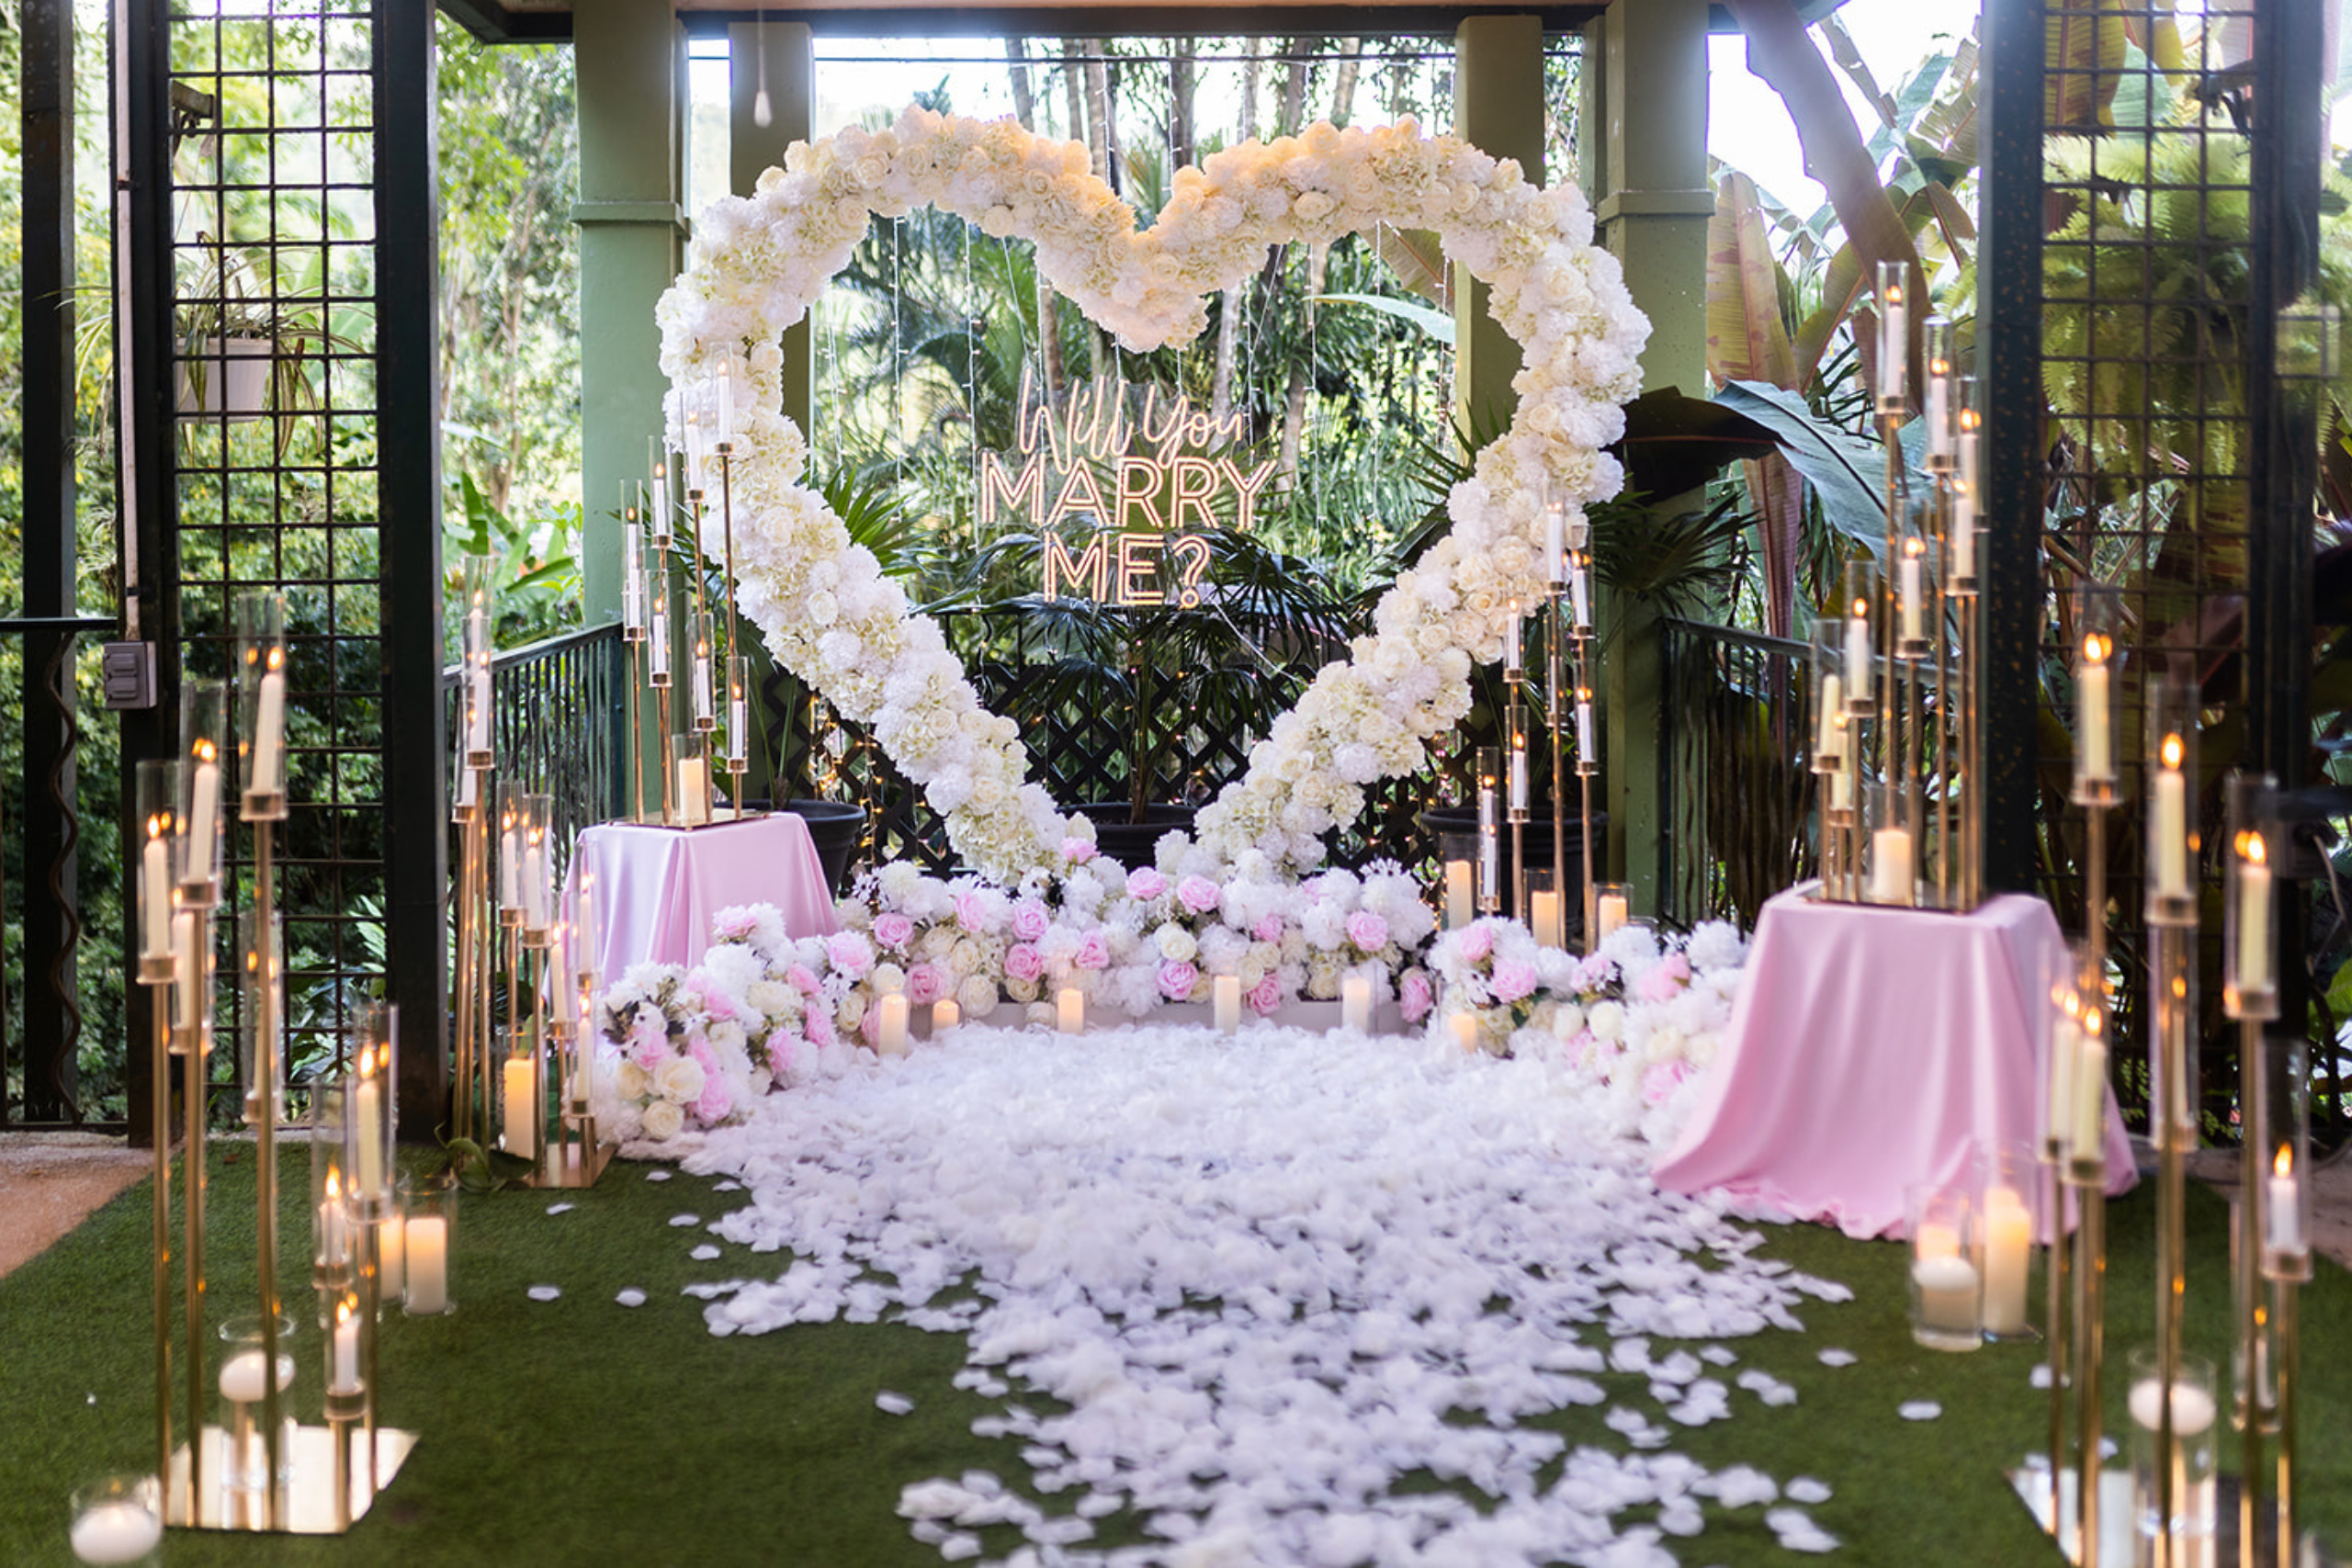 Epic Indoor Heart Arch Marriage Proposal in Trinidad and Tobago. Setup by Picnic-Perfect Ltd. Photo by Ravindra Ramkallawan Photography